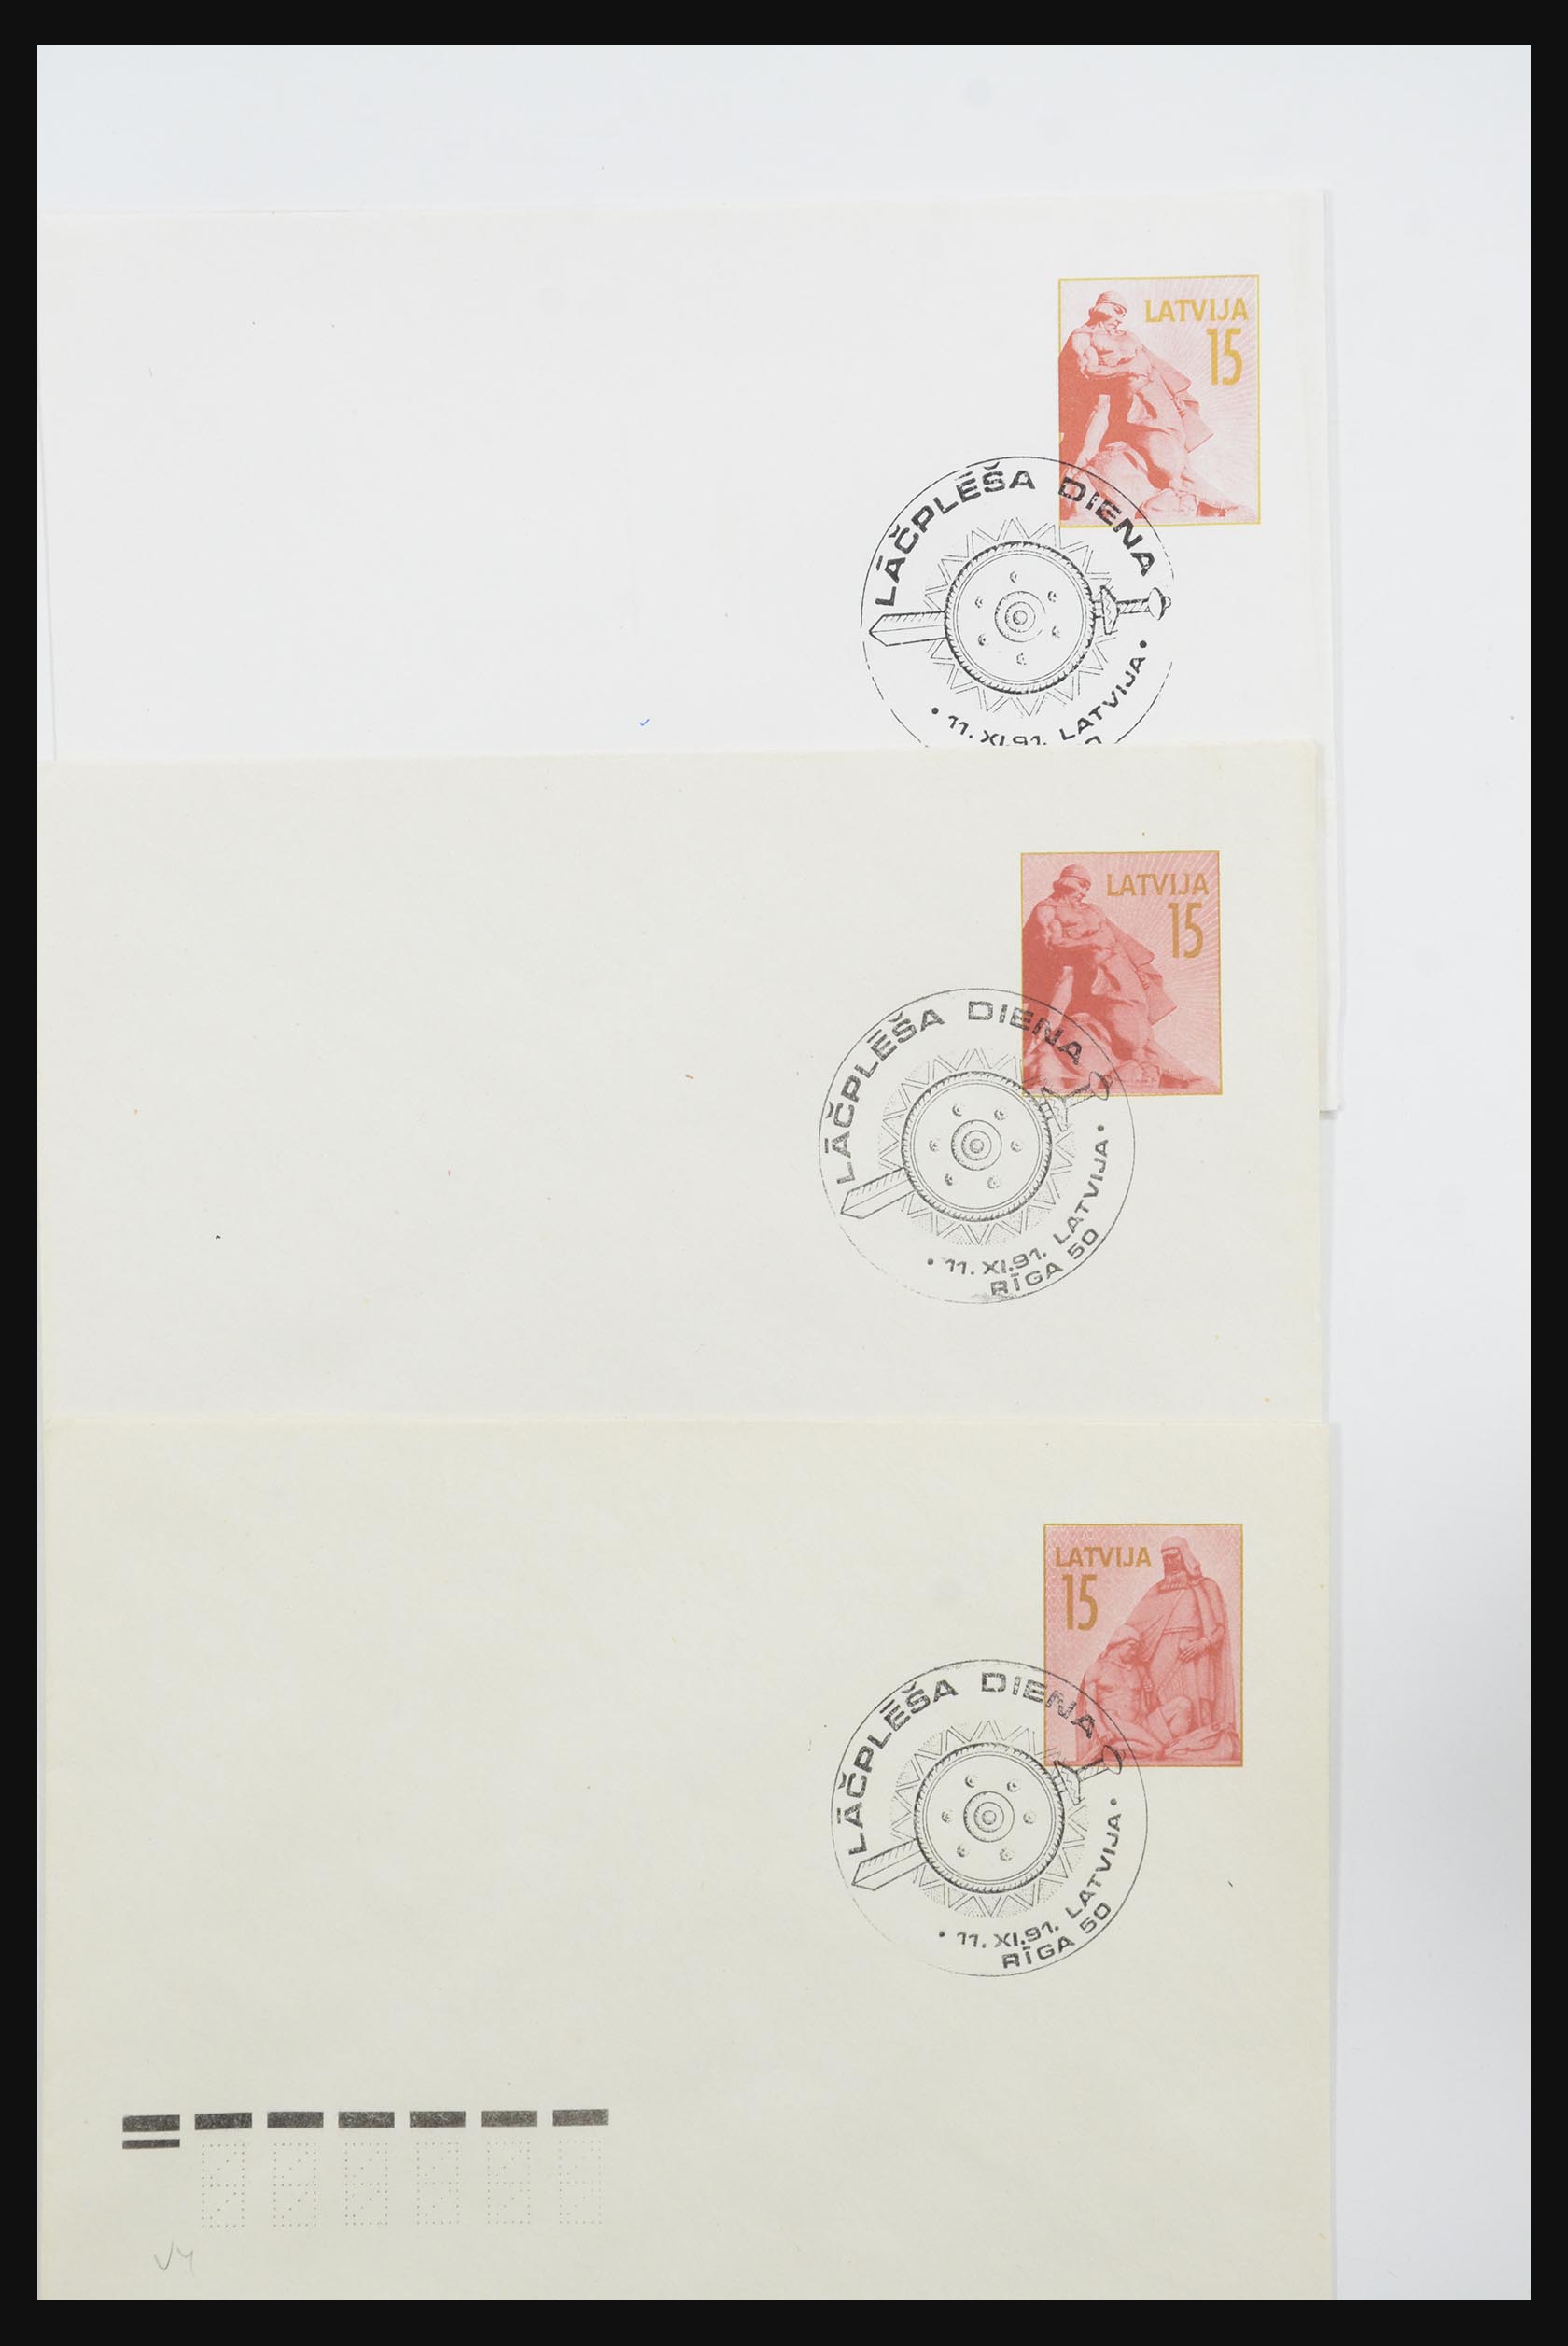 31584 061 - 31584 Latvia covers/FDC's and postal stationeries 1990-1992.